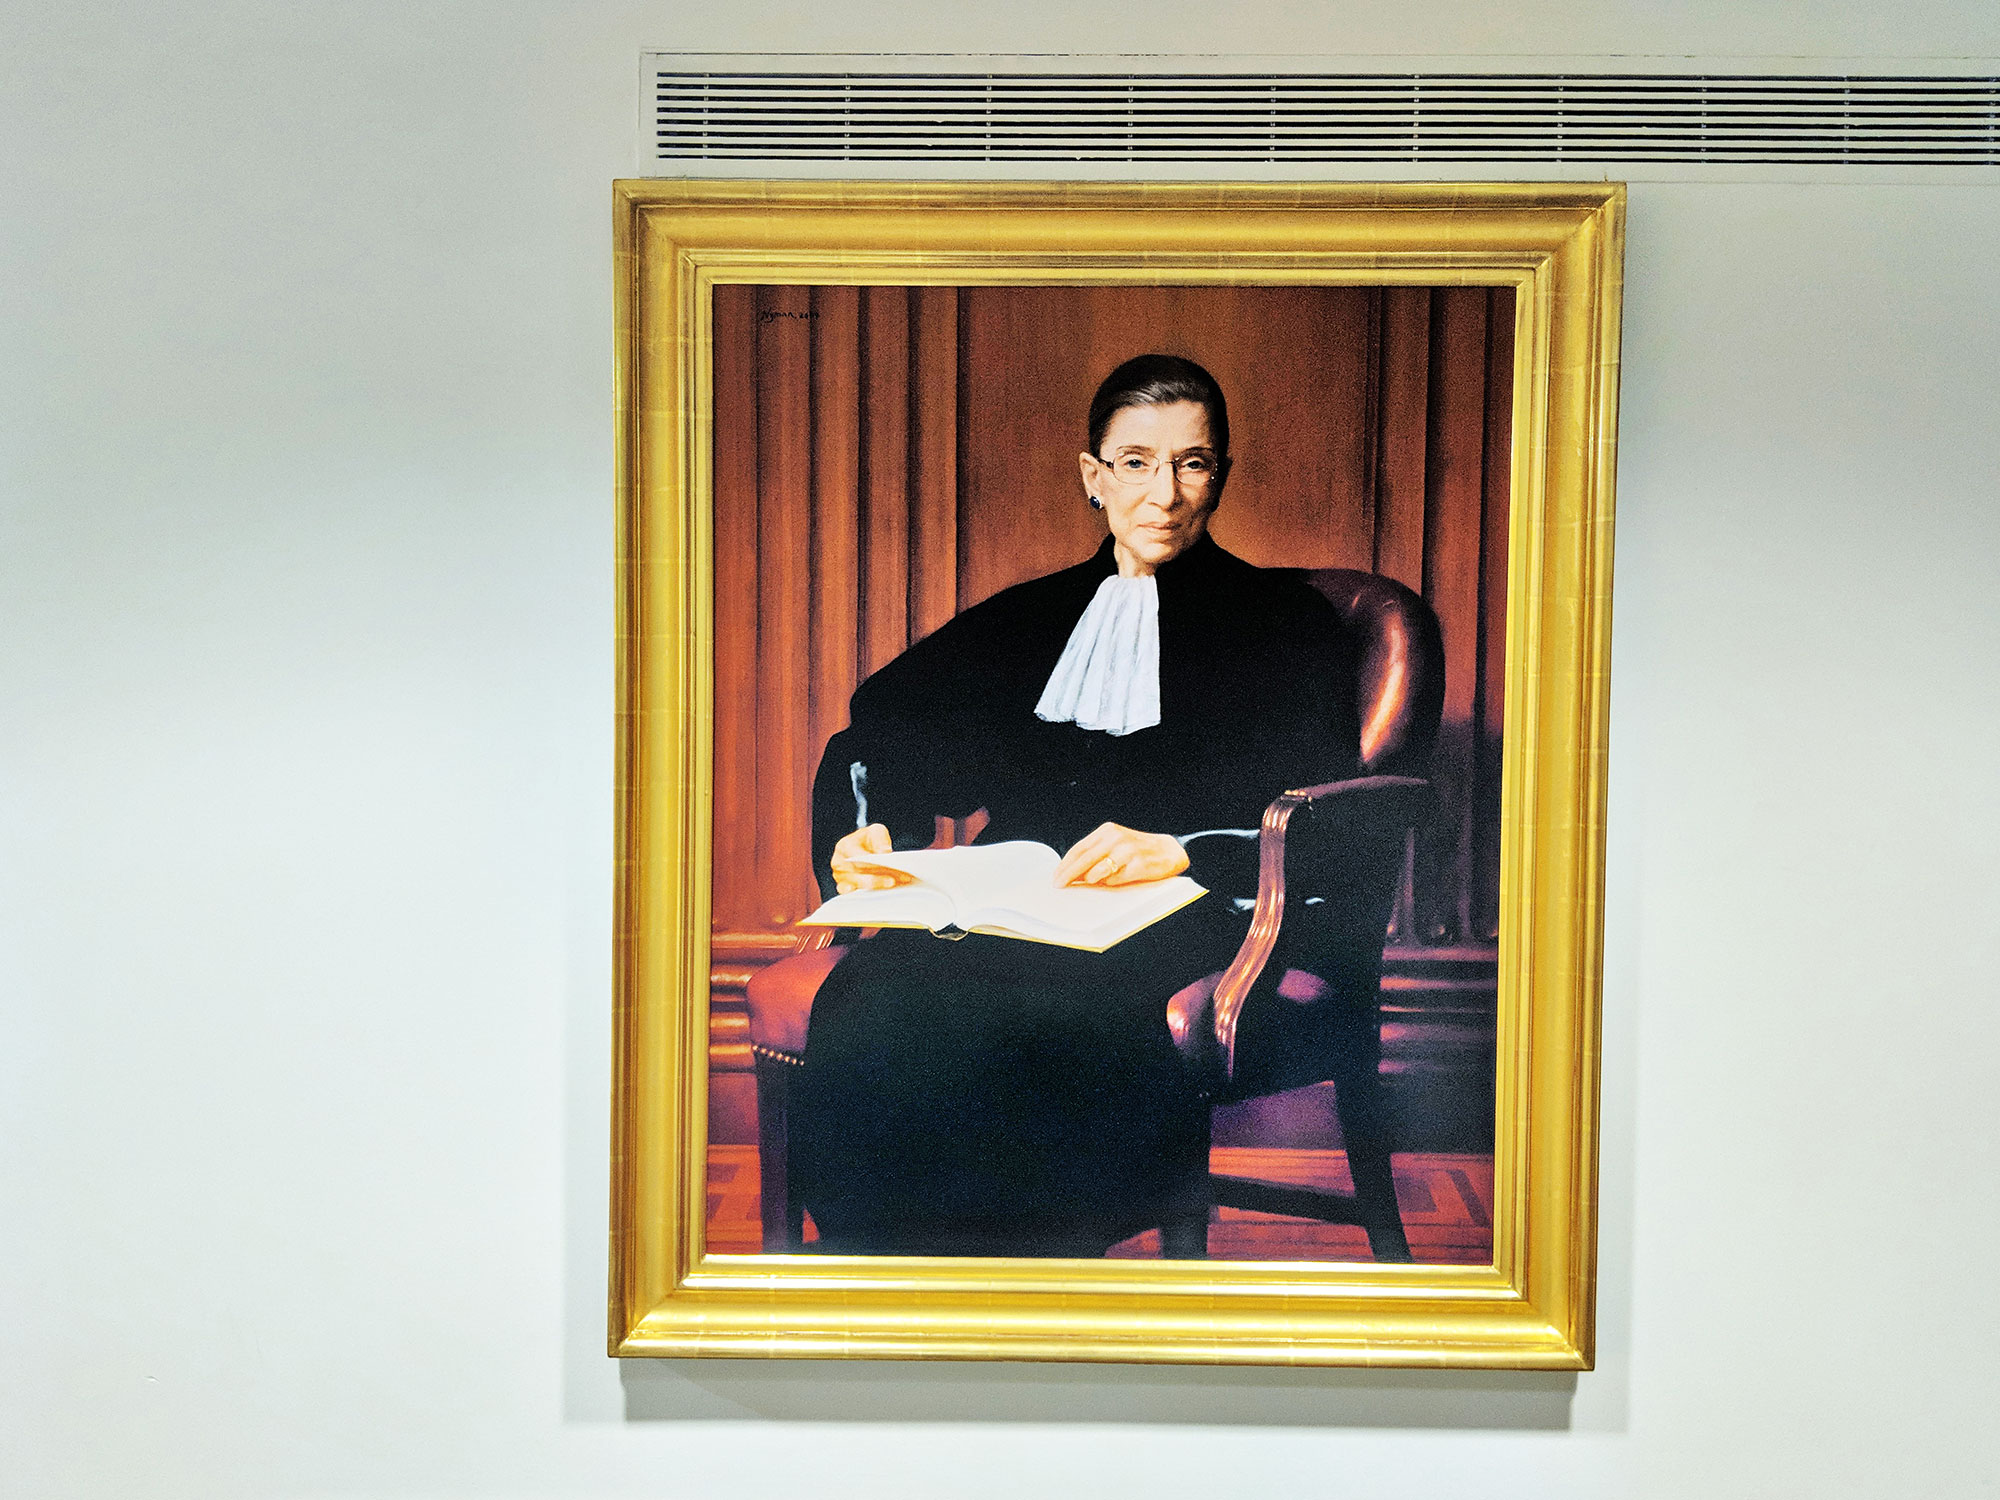 The Ruth Bader Ginsburg portrait at Georgetown Law.